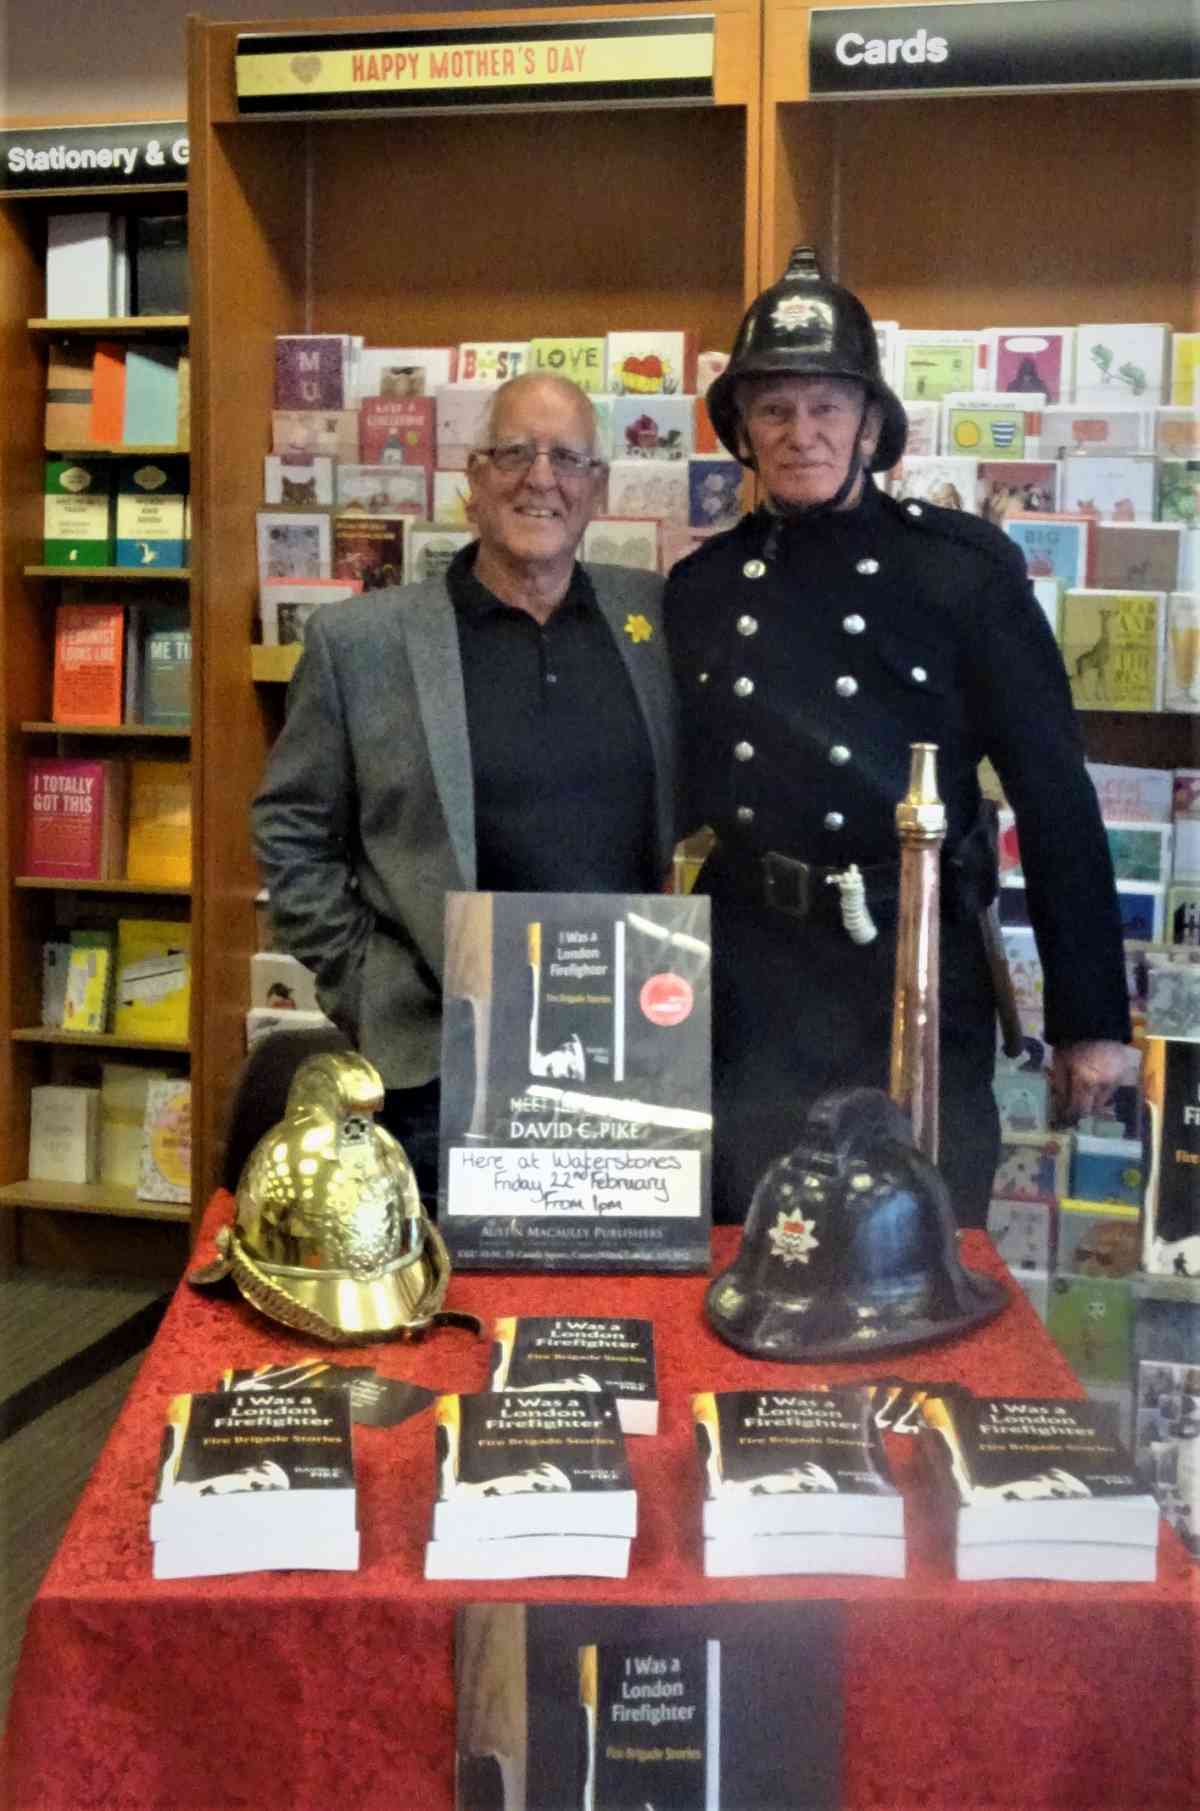 I-Was-a-London-Firefighter-David-C.-Pike-austin-macauley-publishers-attended-a-Book-Signing